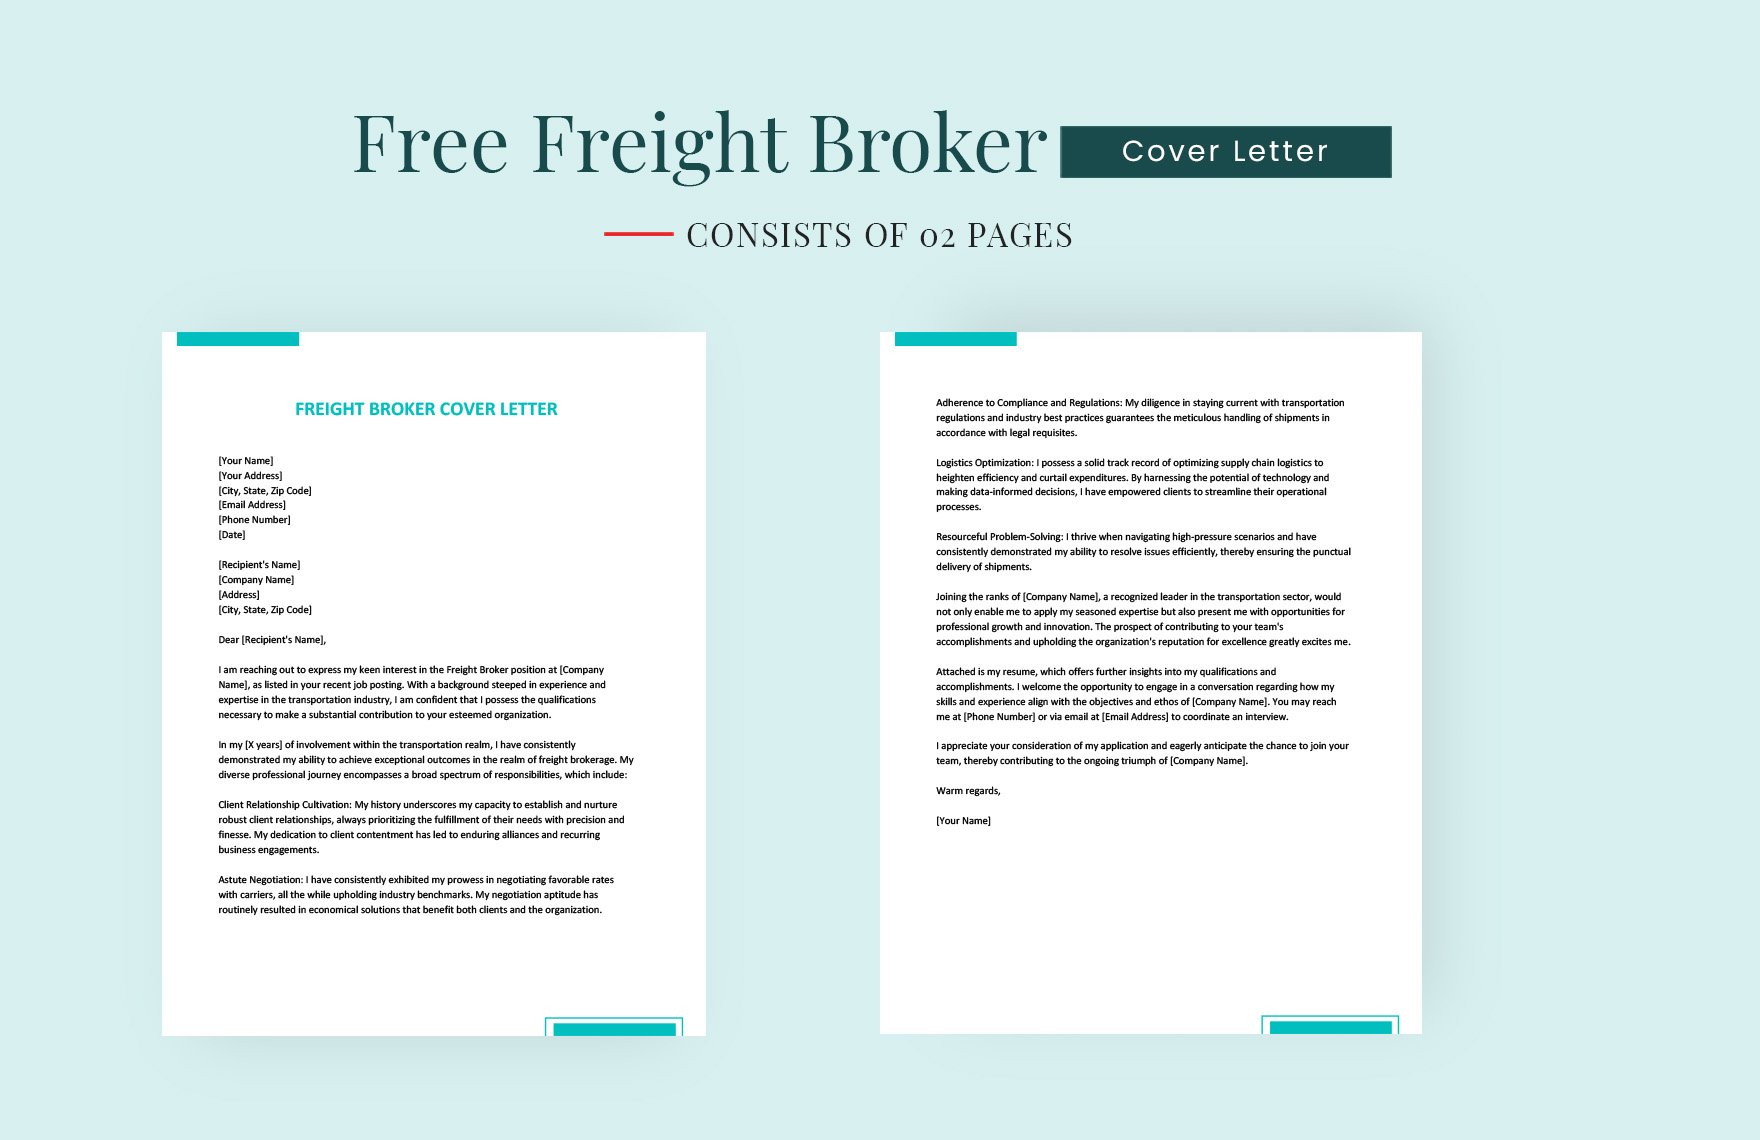 Freight Broker Cover Letter in Word, Google Docs